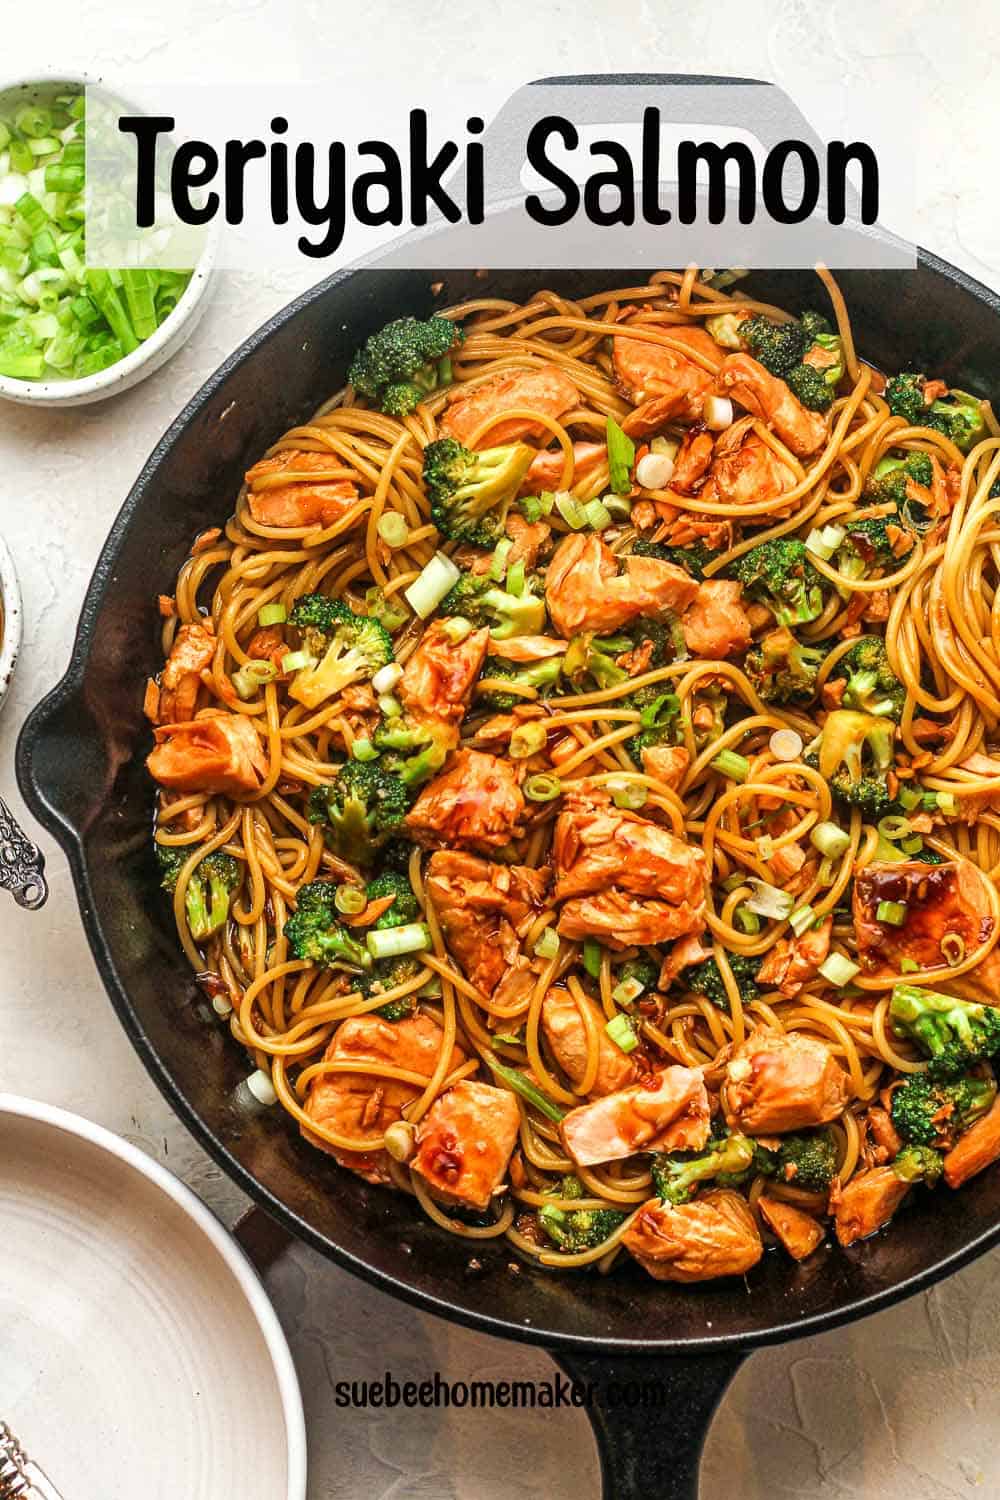 A large skillet of teriyaki salmon with noodles and broccoli florets.